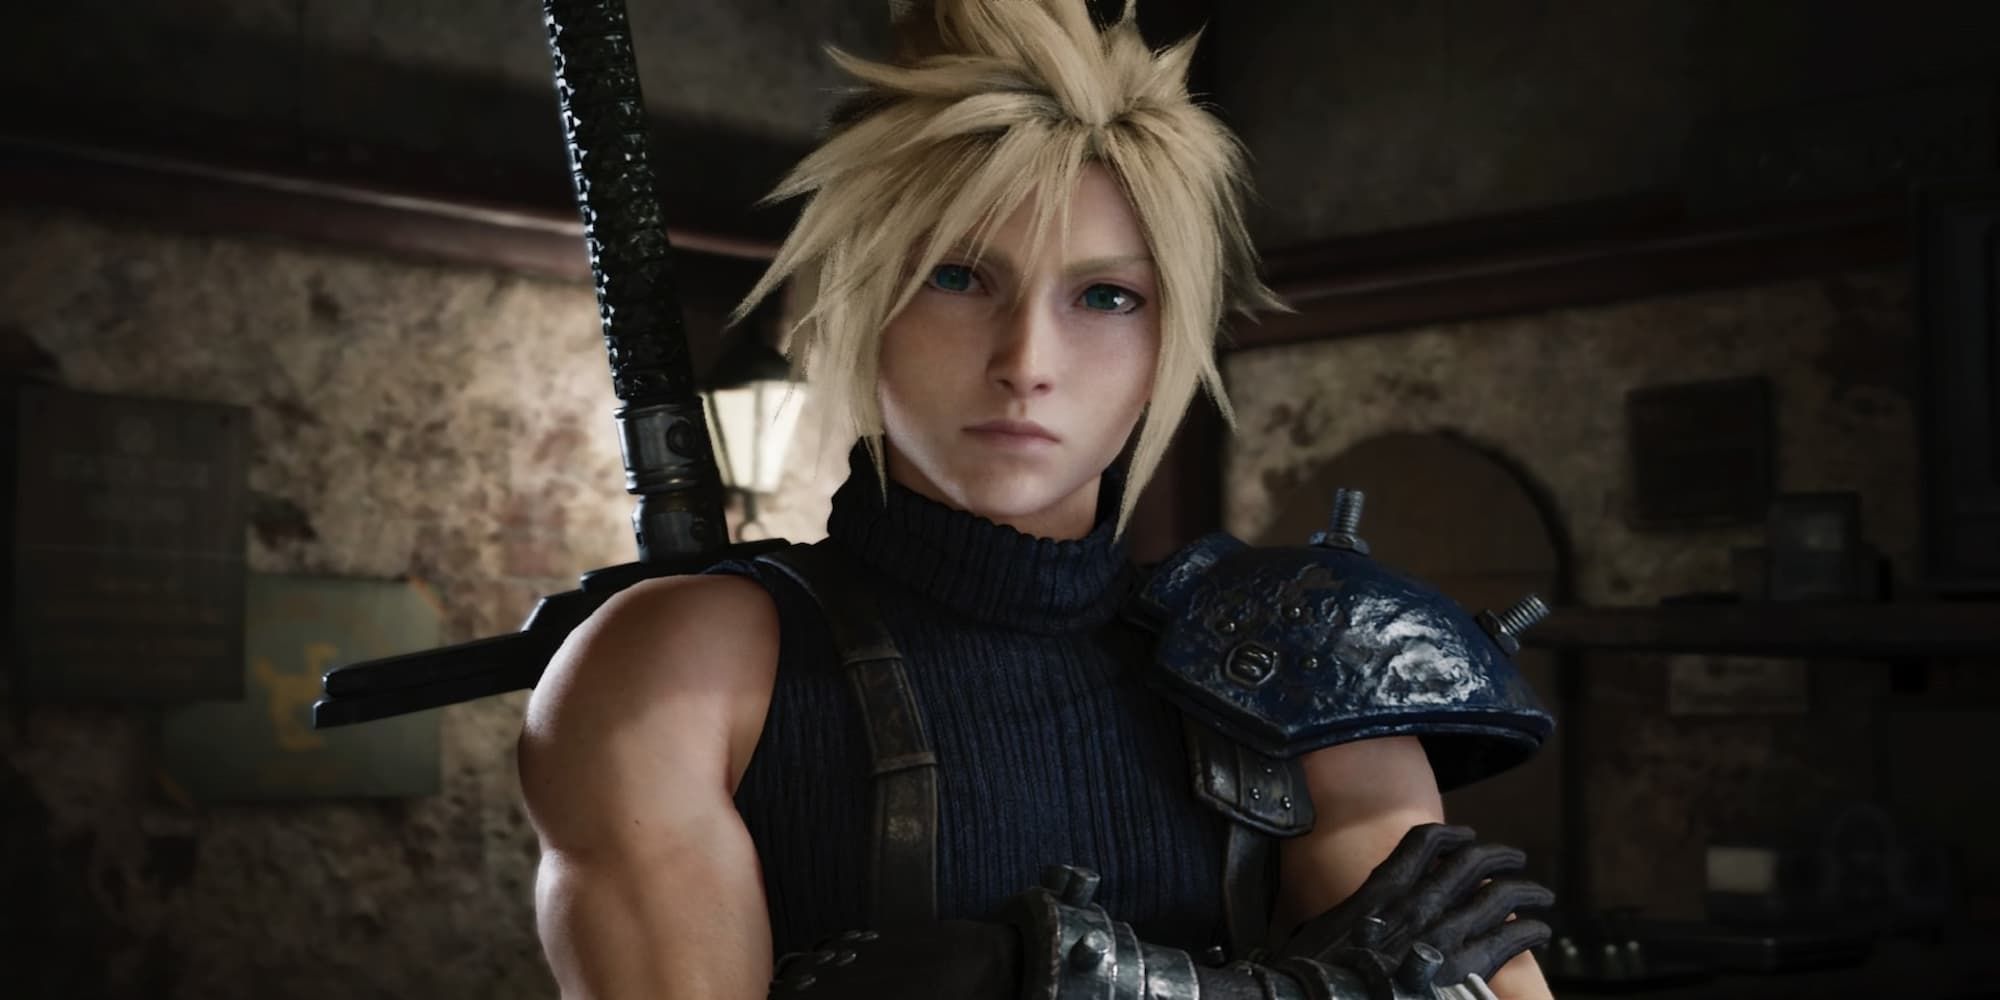 Cloud Standing With Arms Crossed